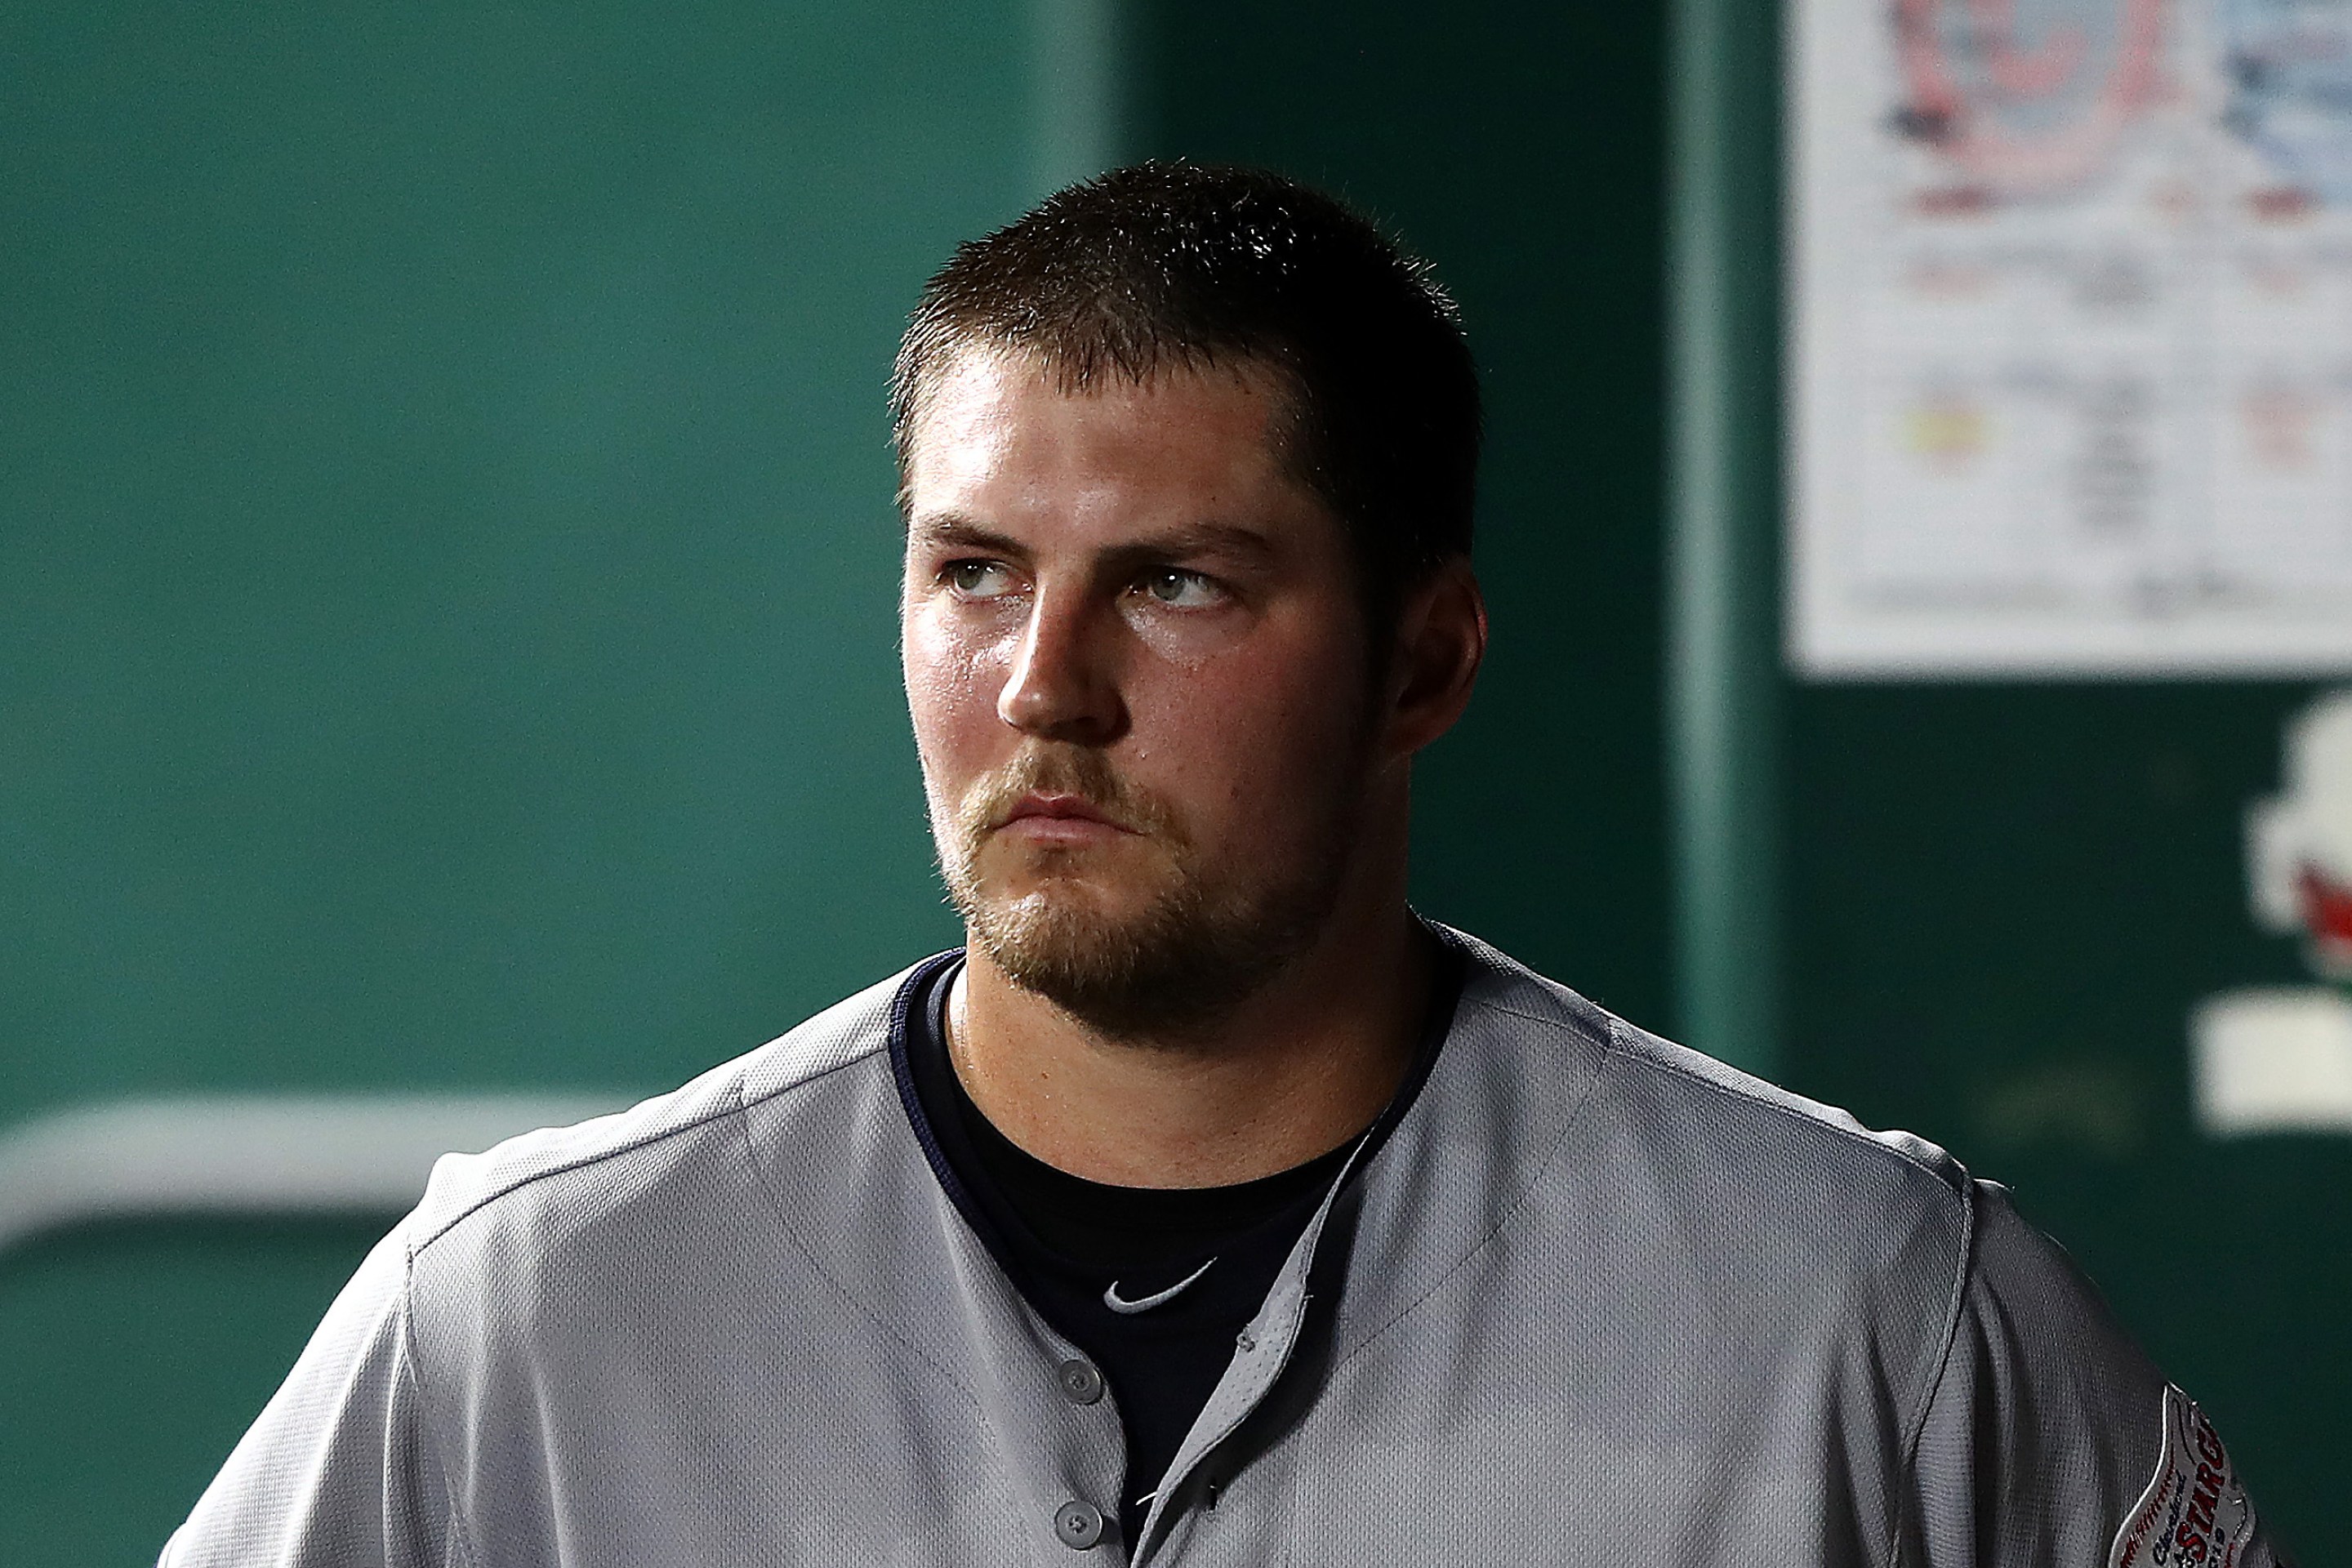 KANSAS CITY, MISSOURI - JULY 02: Starting pitcher Trevor Bauer #47 of the Cleveland Indians watches from the dugout after leaving the game during the 7th inning of the game against the Kansas City Royals at Kauffman Stadium on July 02, 2019 in Kansas City, Missouri. (Photo by Jamie Squire/Getty Images)